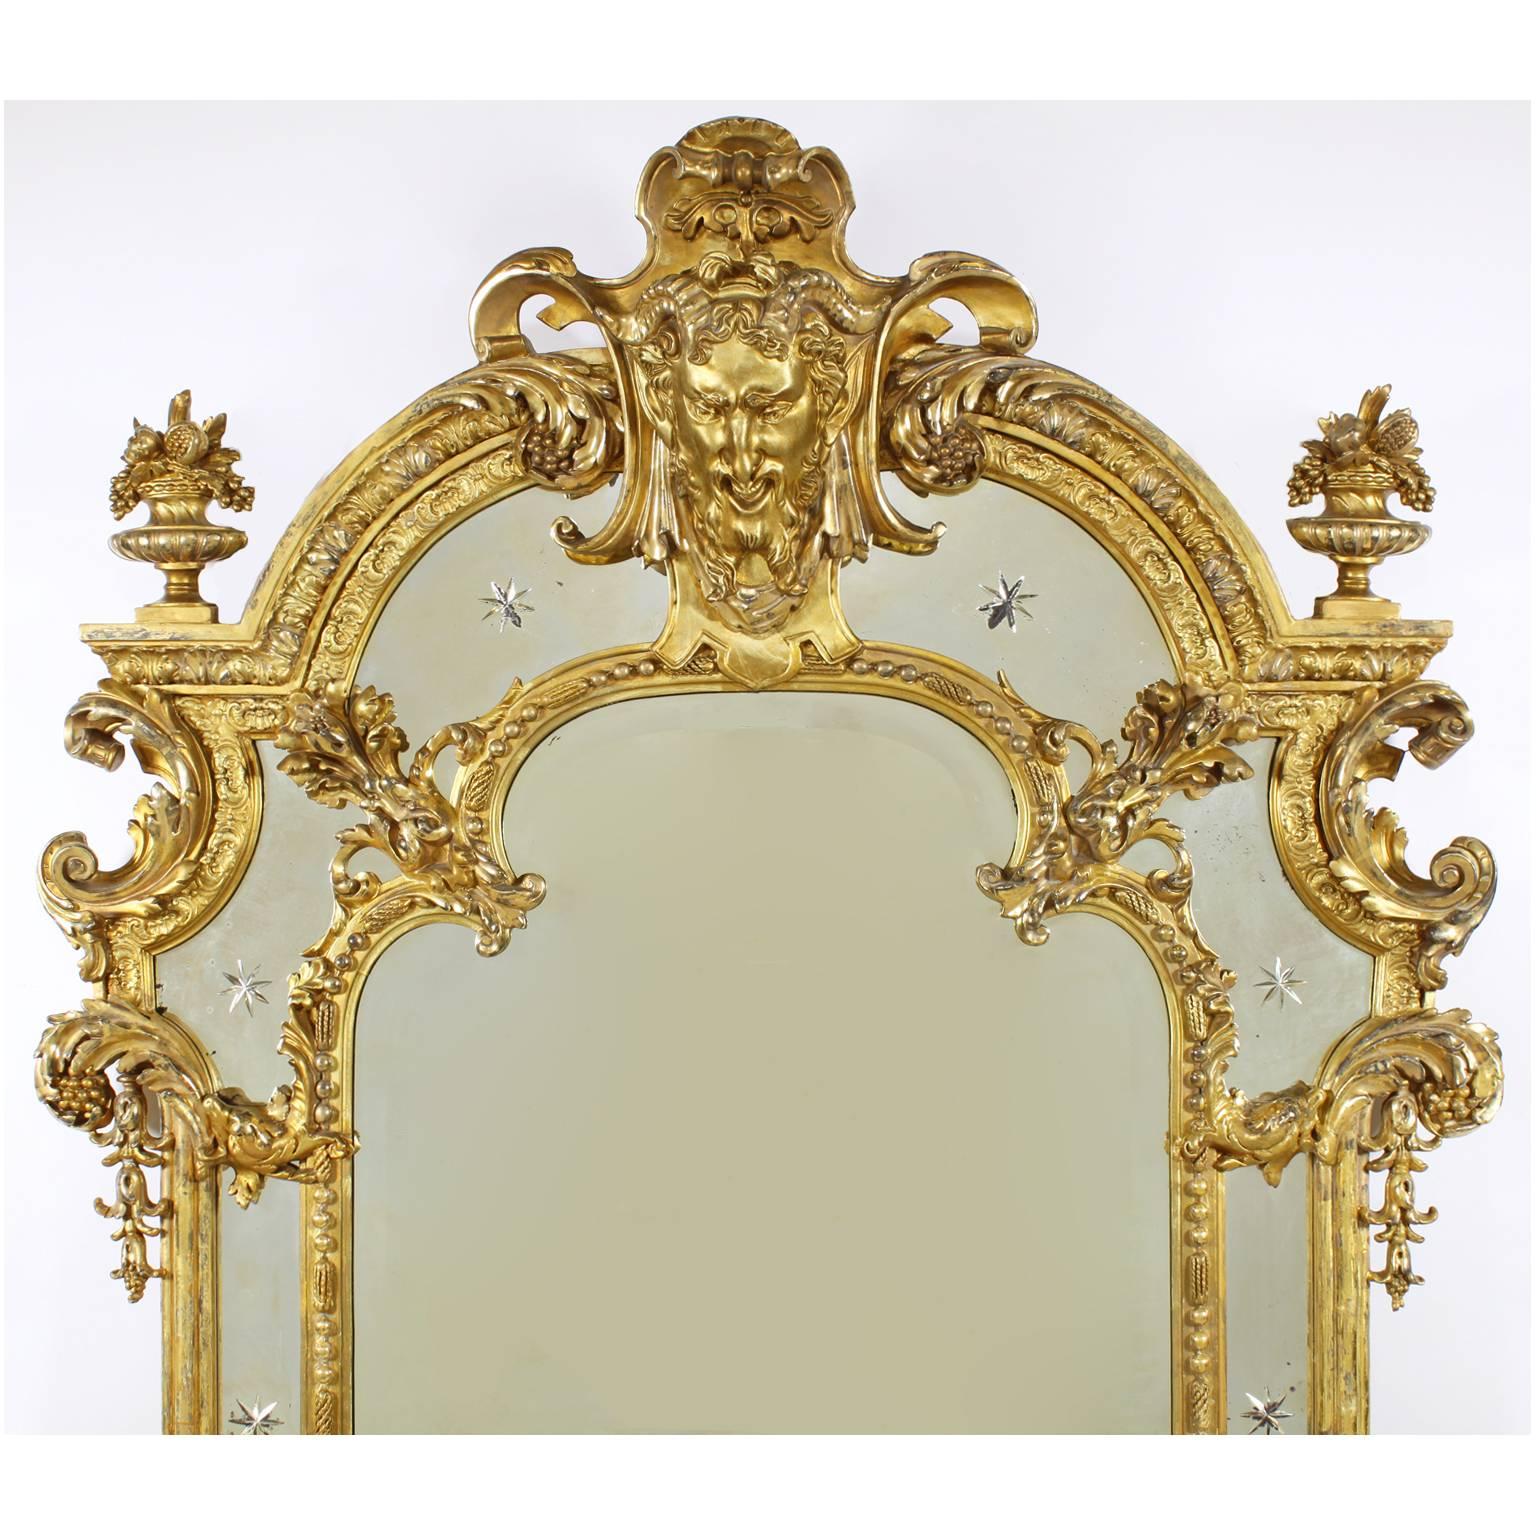 A very fine French 19th century Louis XV style giltwood and gesso carved figural mirror frame, Surmounted with two cherubs amongst fruits and vines, each holding the entire frame one on each side, the top with a mask of a satyr surmounted with